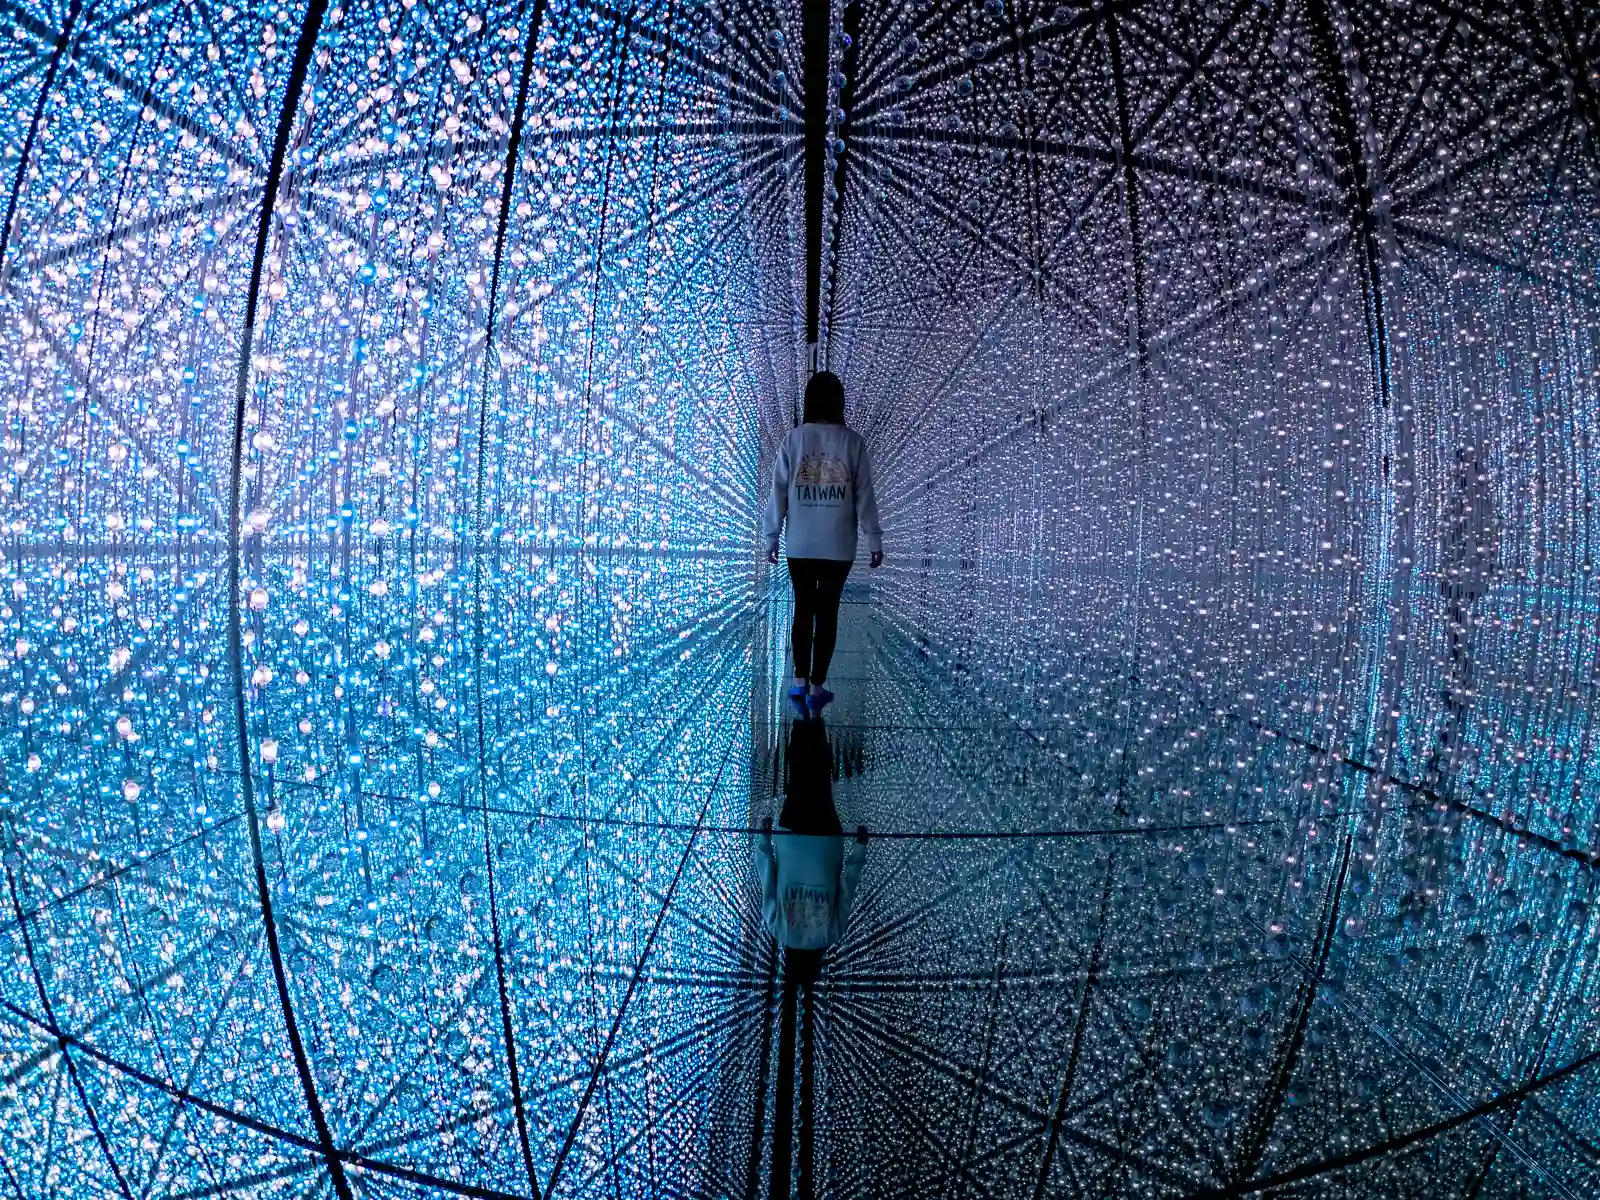 Crystal lights are mirrored to create a symmetrical space-like scene with a person at the center.